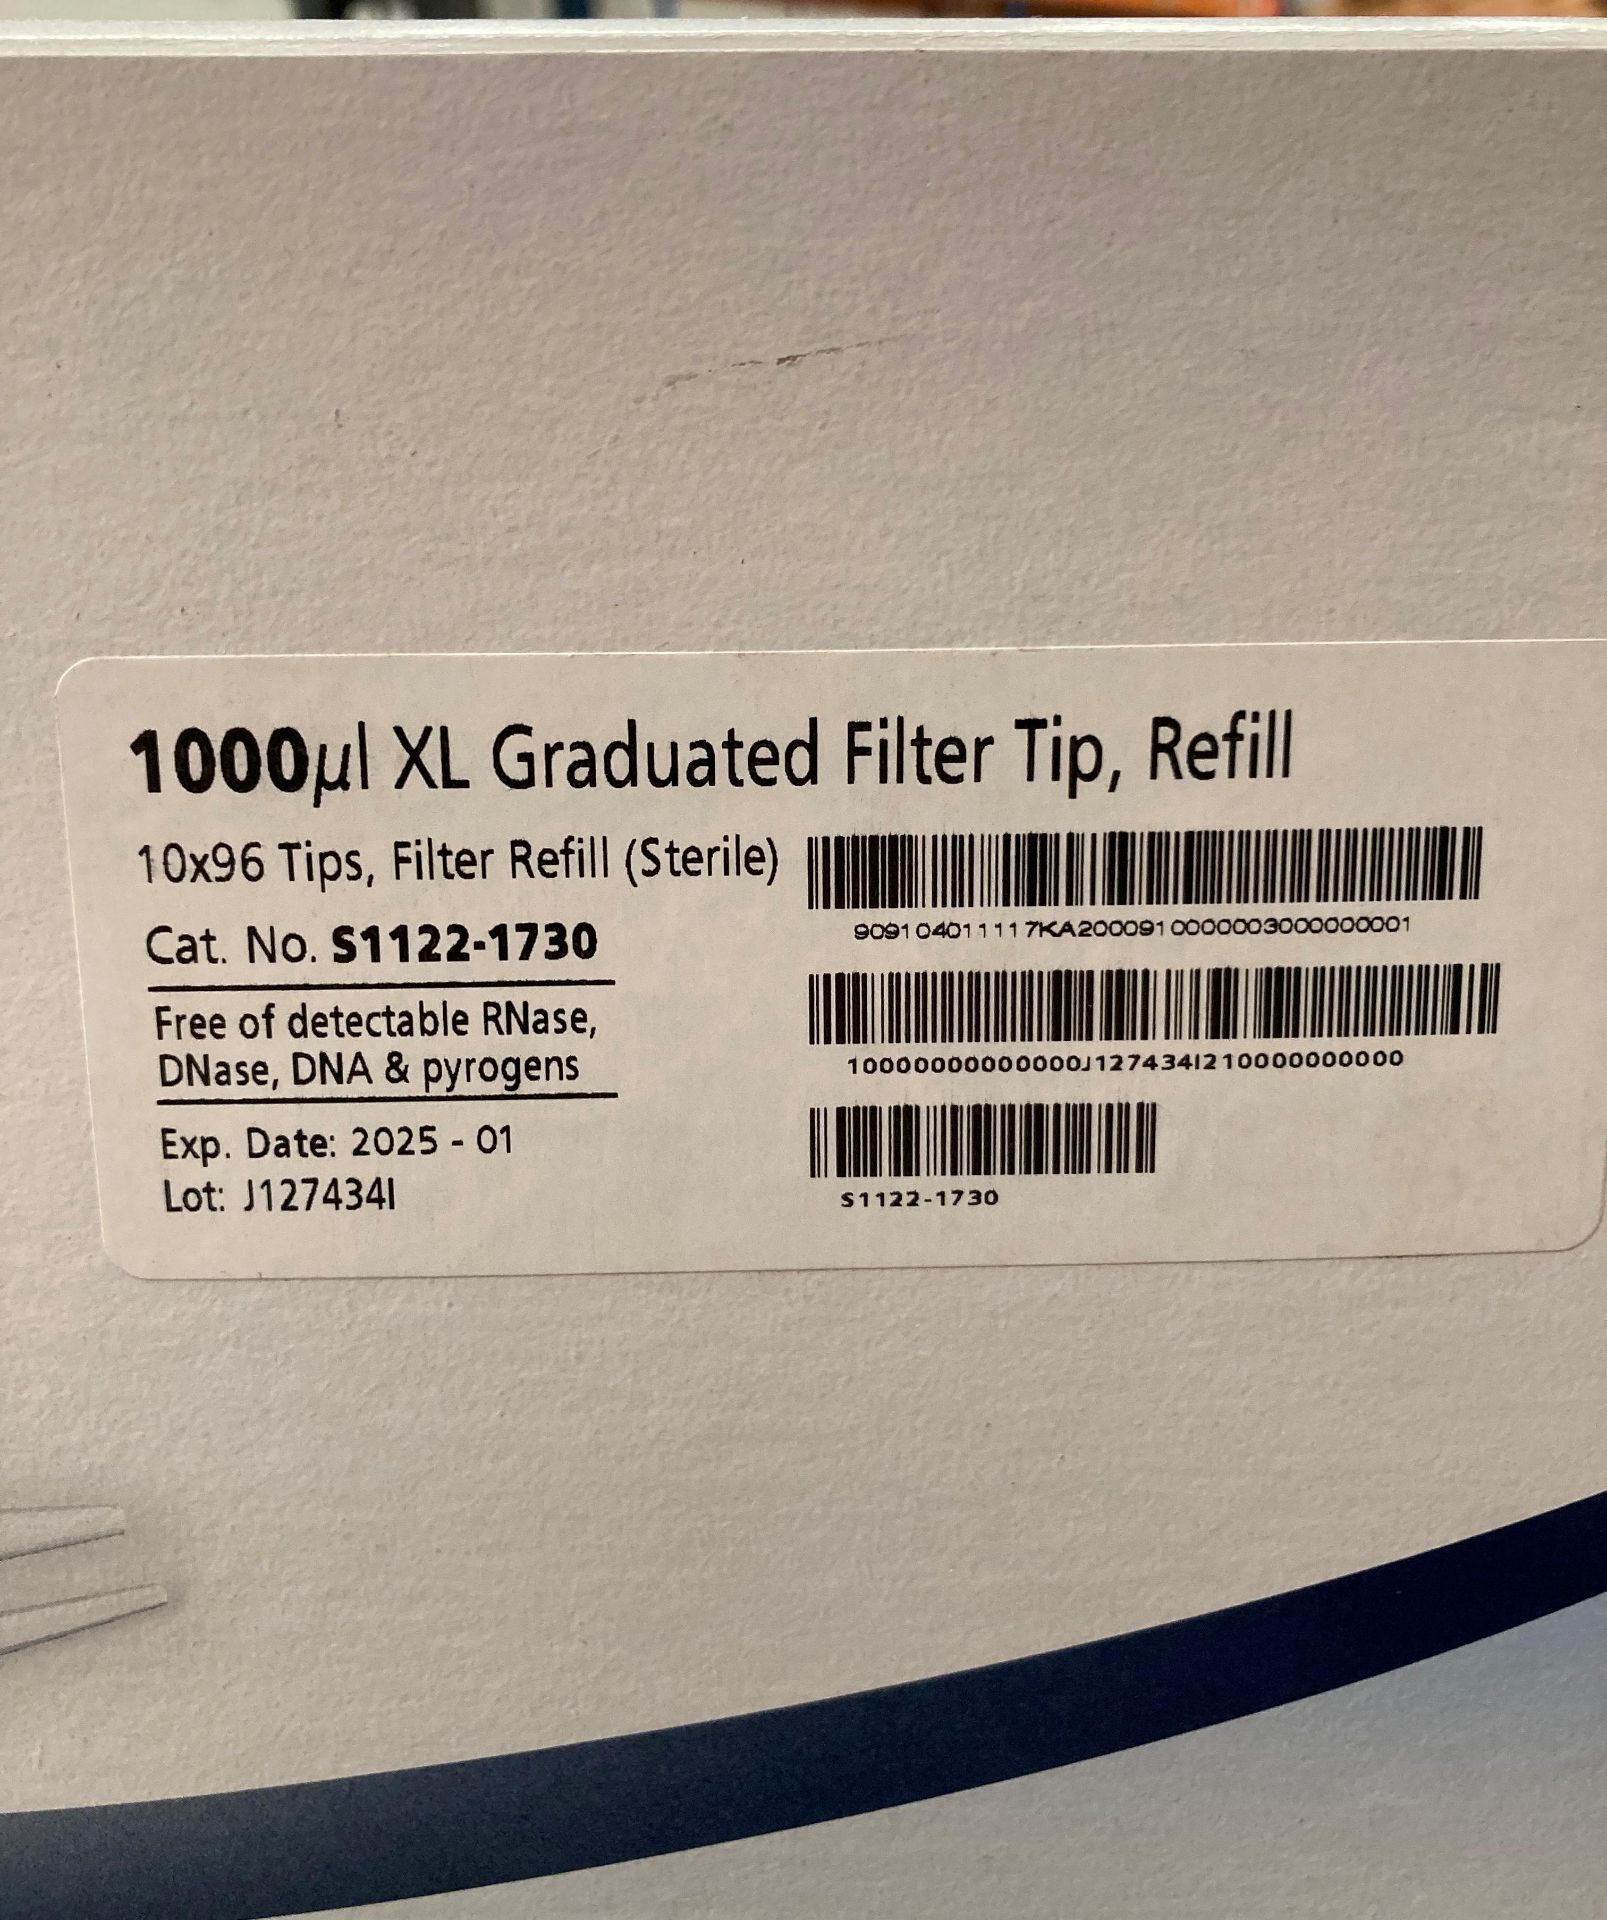 23,040 x Tip One 1000 XL graduated filter tip refills (6 outer boxes) - Image 2 of 2